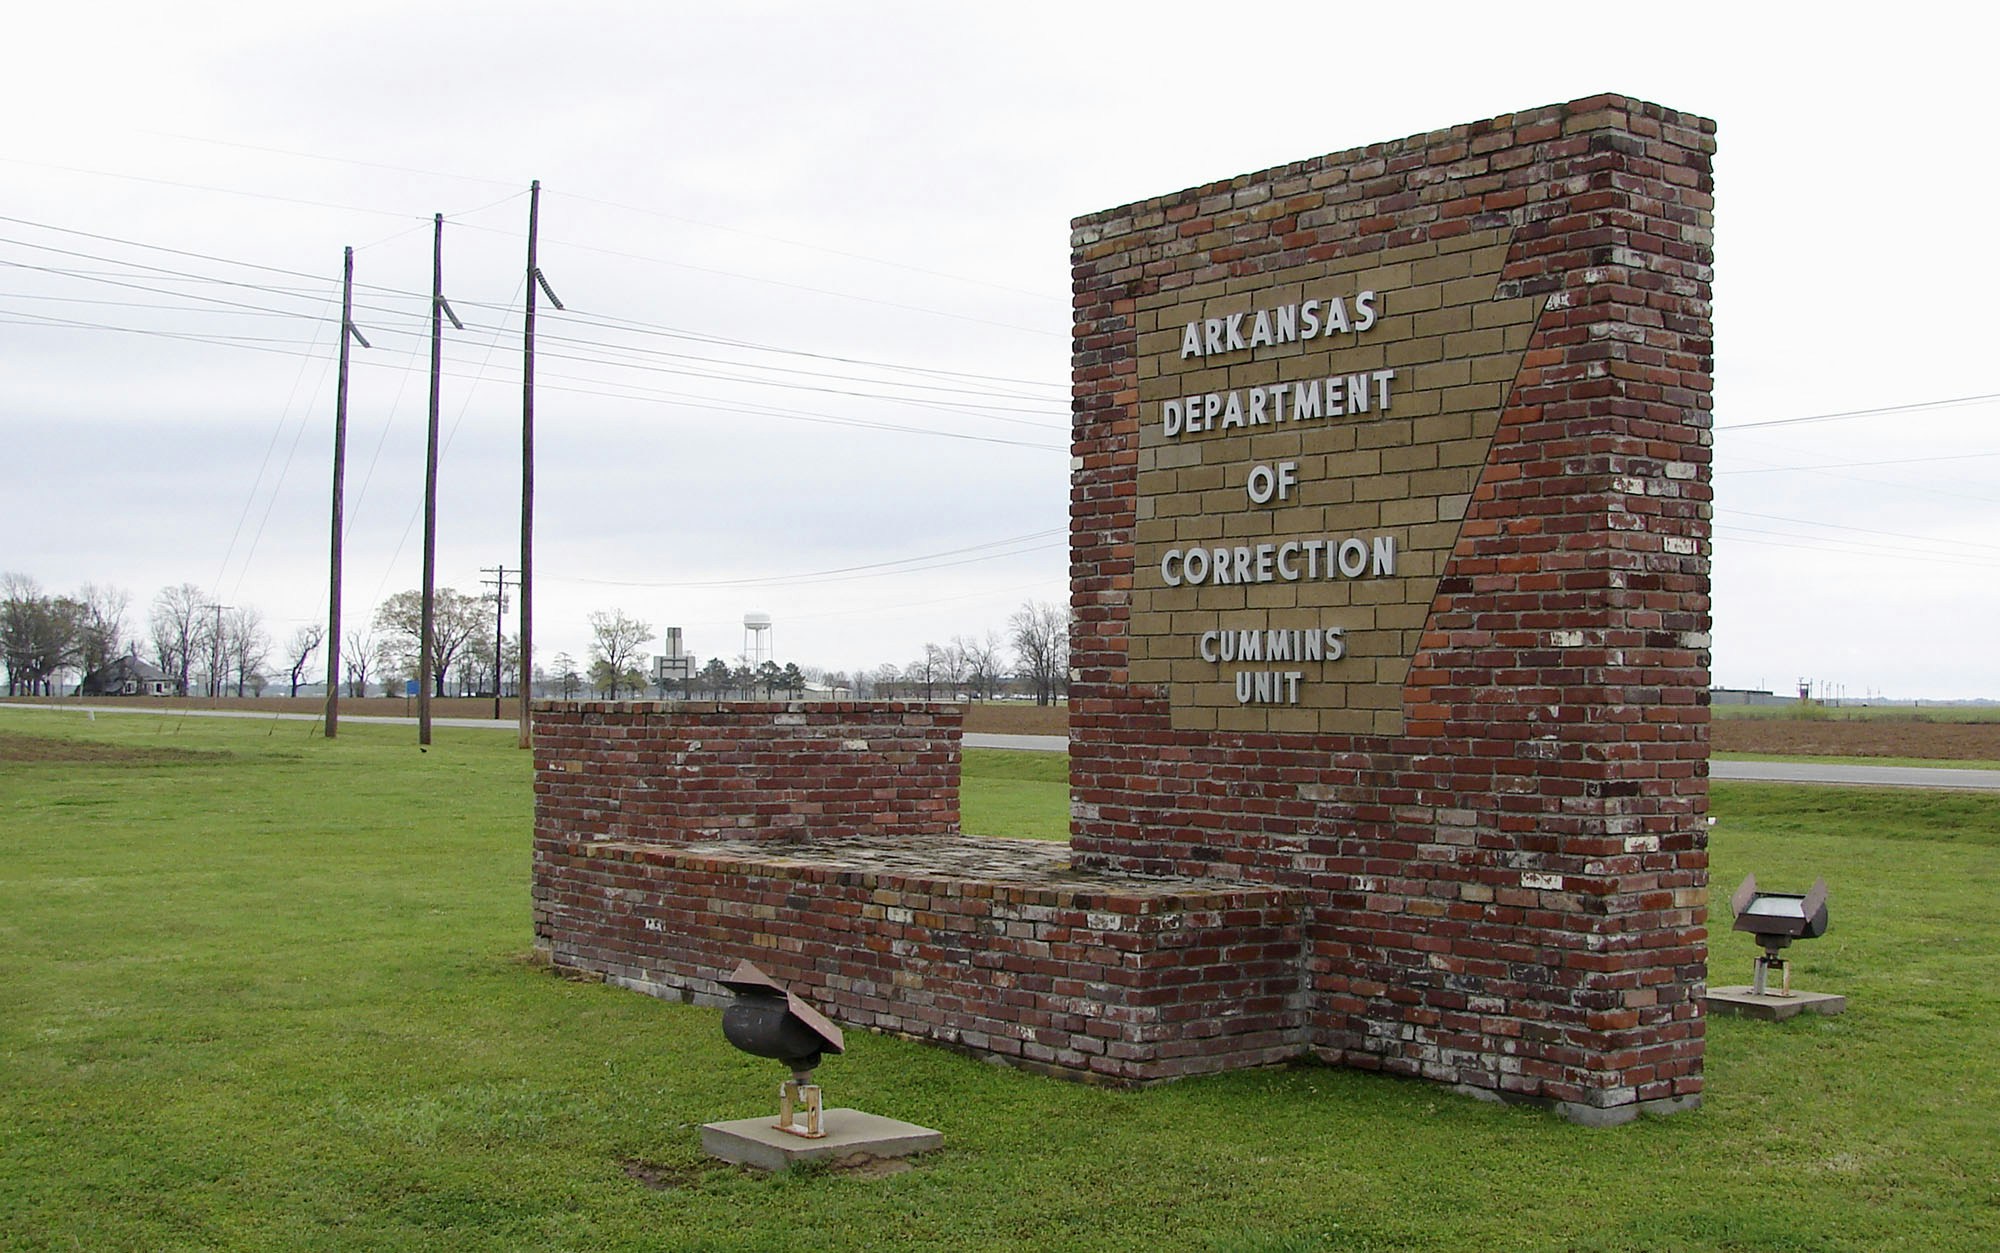 This March 25, 2017, photo shows a sign for the Department of Correction's Cummins Unit prison in Varner, Ark. Eight prisoners have been scheduled to die at the prison in April as Arkansas rushes to use an execution drug that expires at the end of the month. (AP Photo/Kelly P. Kissel)